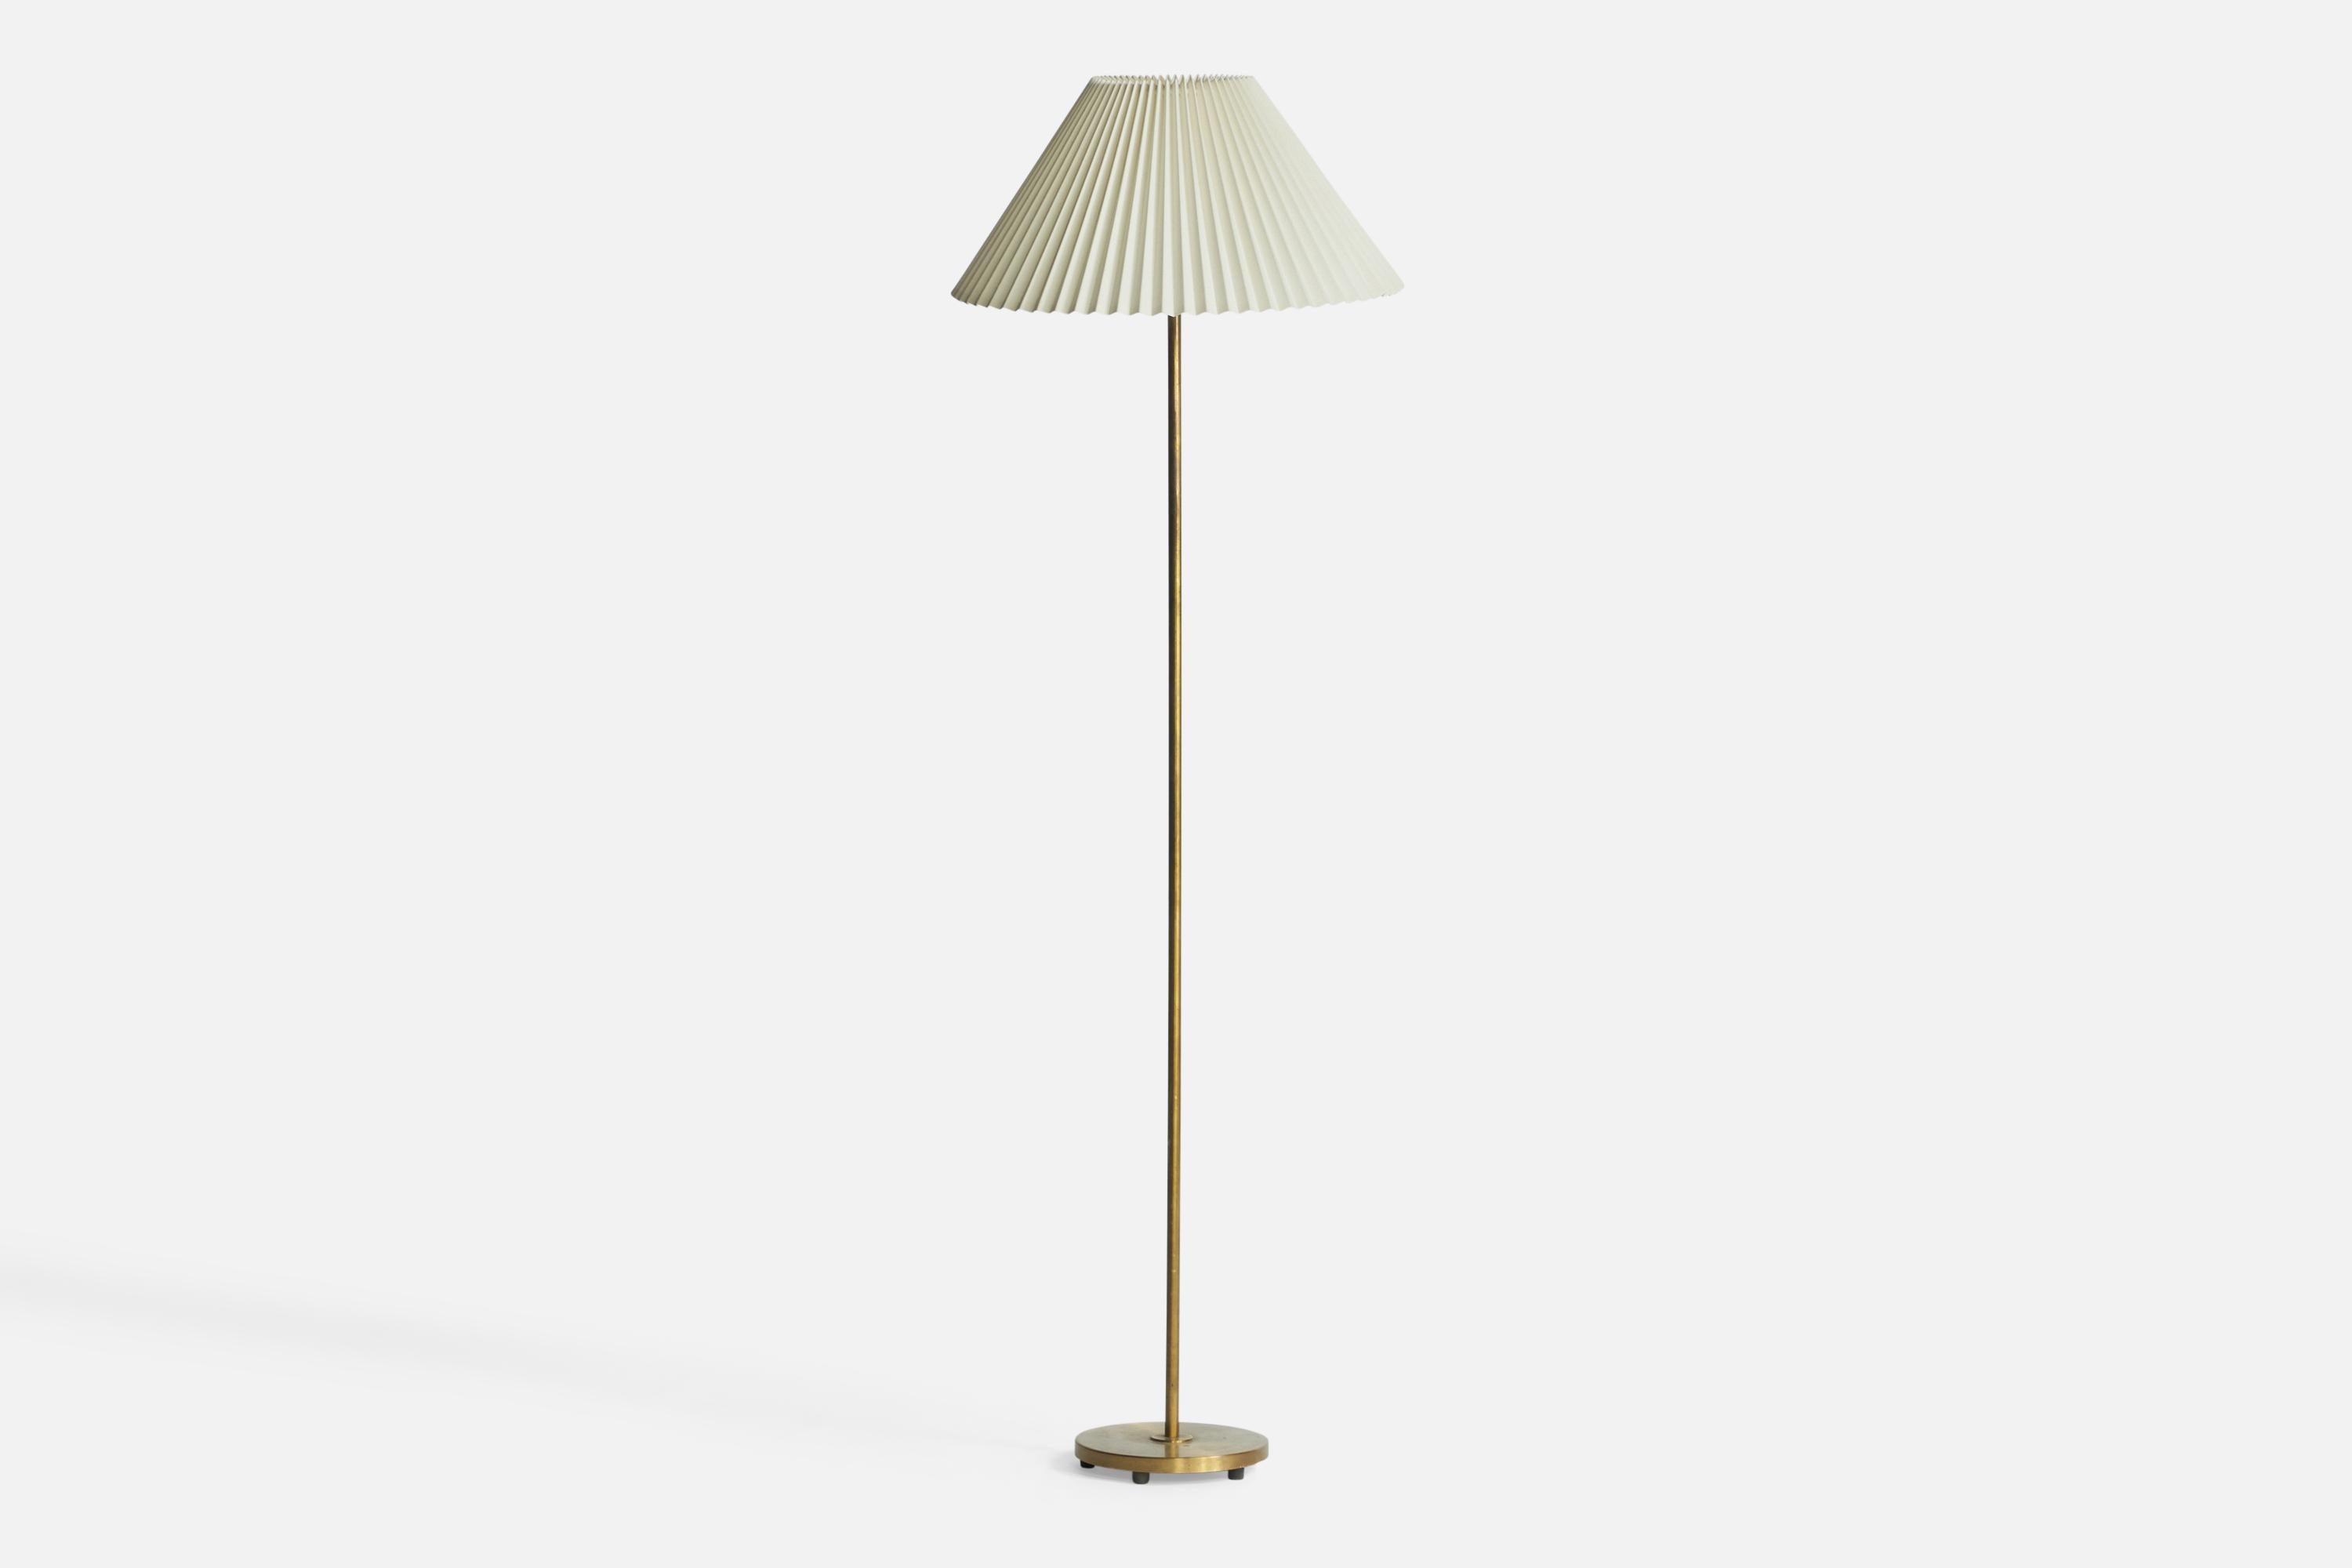 A brass and white paper floor lamp designed and produced in Sweden, 1940s.

Overall Dimensions (inches): 60” H x 19” W x 19” D. Diameter of base is 8.75”. Diameter of shade is 19”. Stated dimensions include lampshade.
Bulb Specifications: E-26